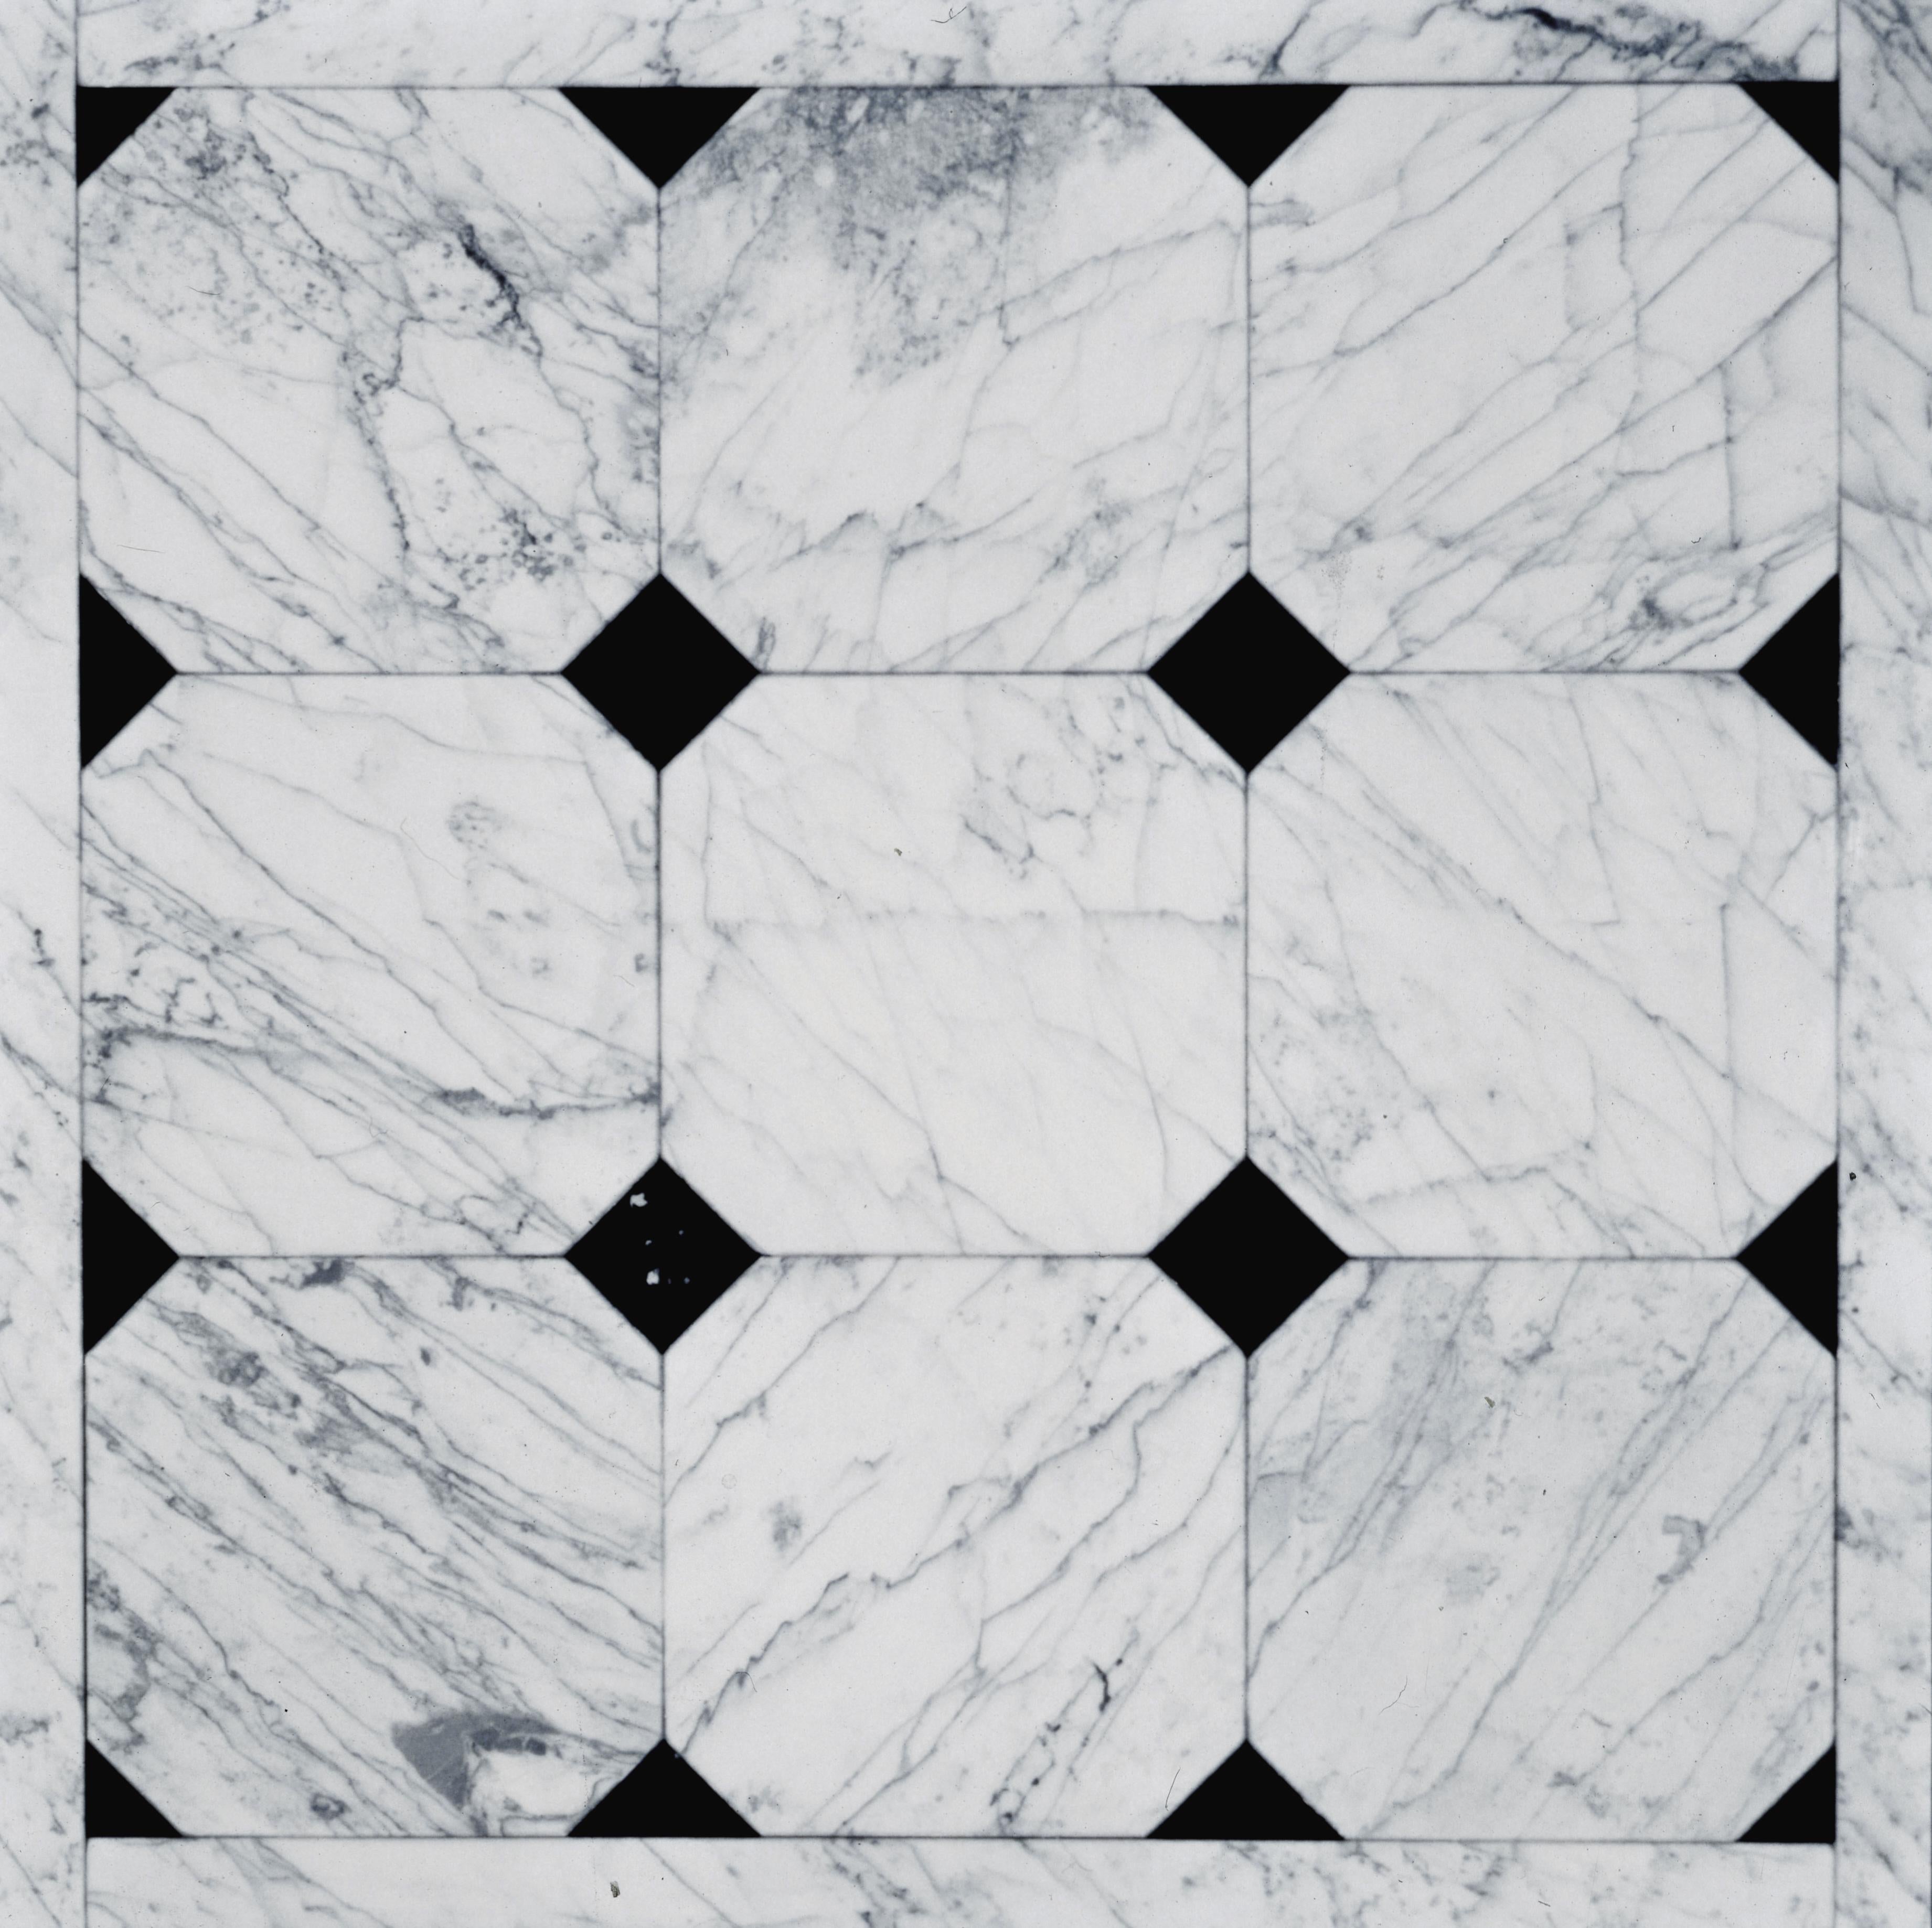 The price is per square meter.
Name: DA1
Materials: Bianco Pennsylvania, Nero Marquina
Size : Cm 40X40 - 7 X 7
Thickness: cm 2
KG/MQ: Kg 54
Finishes: Polished
Designed by: Up & Up.

 